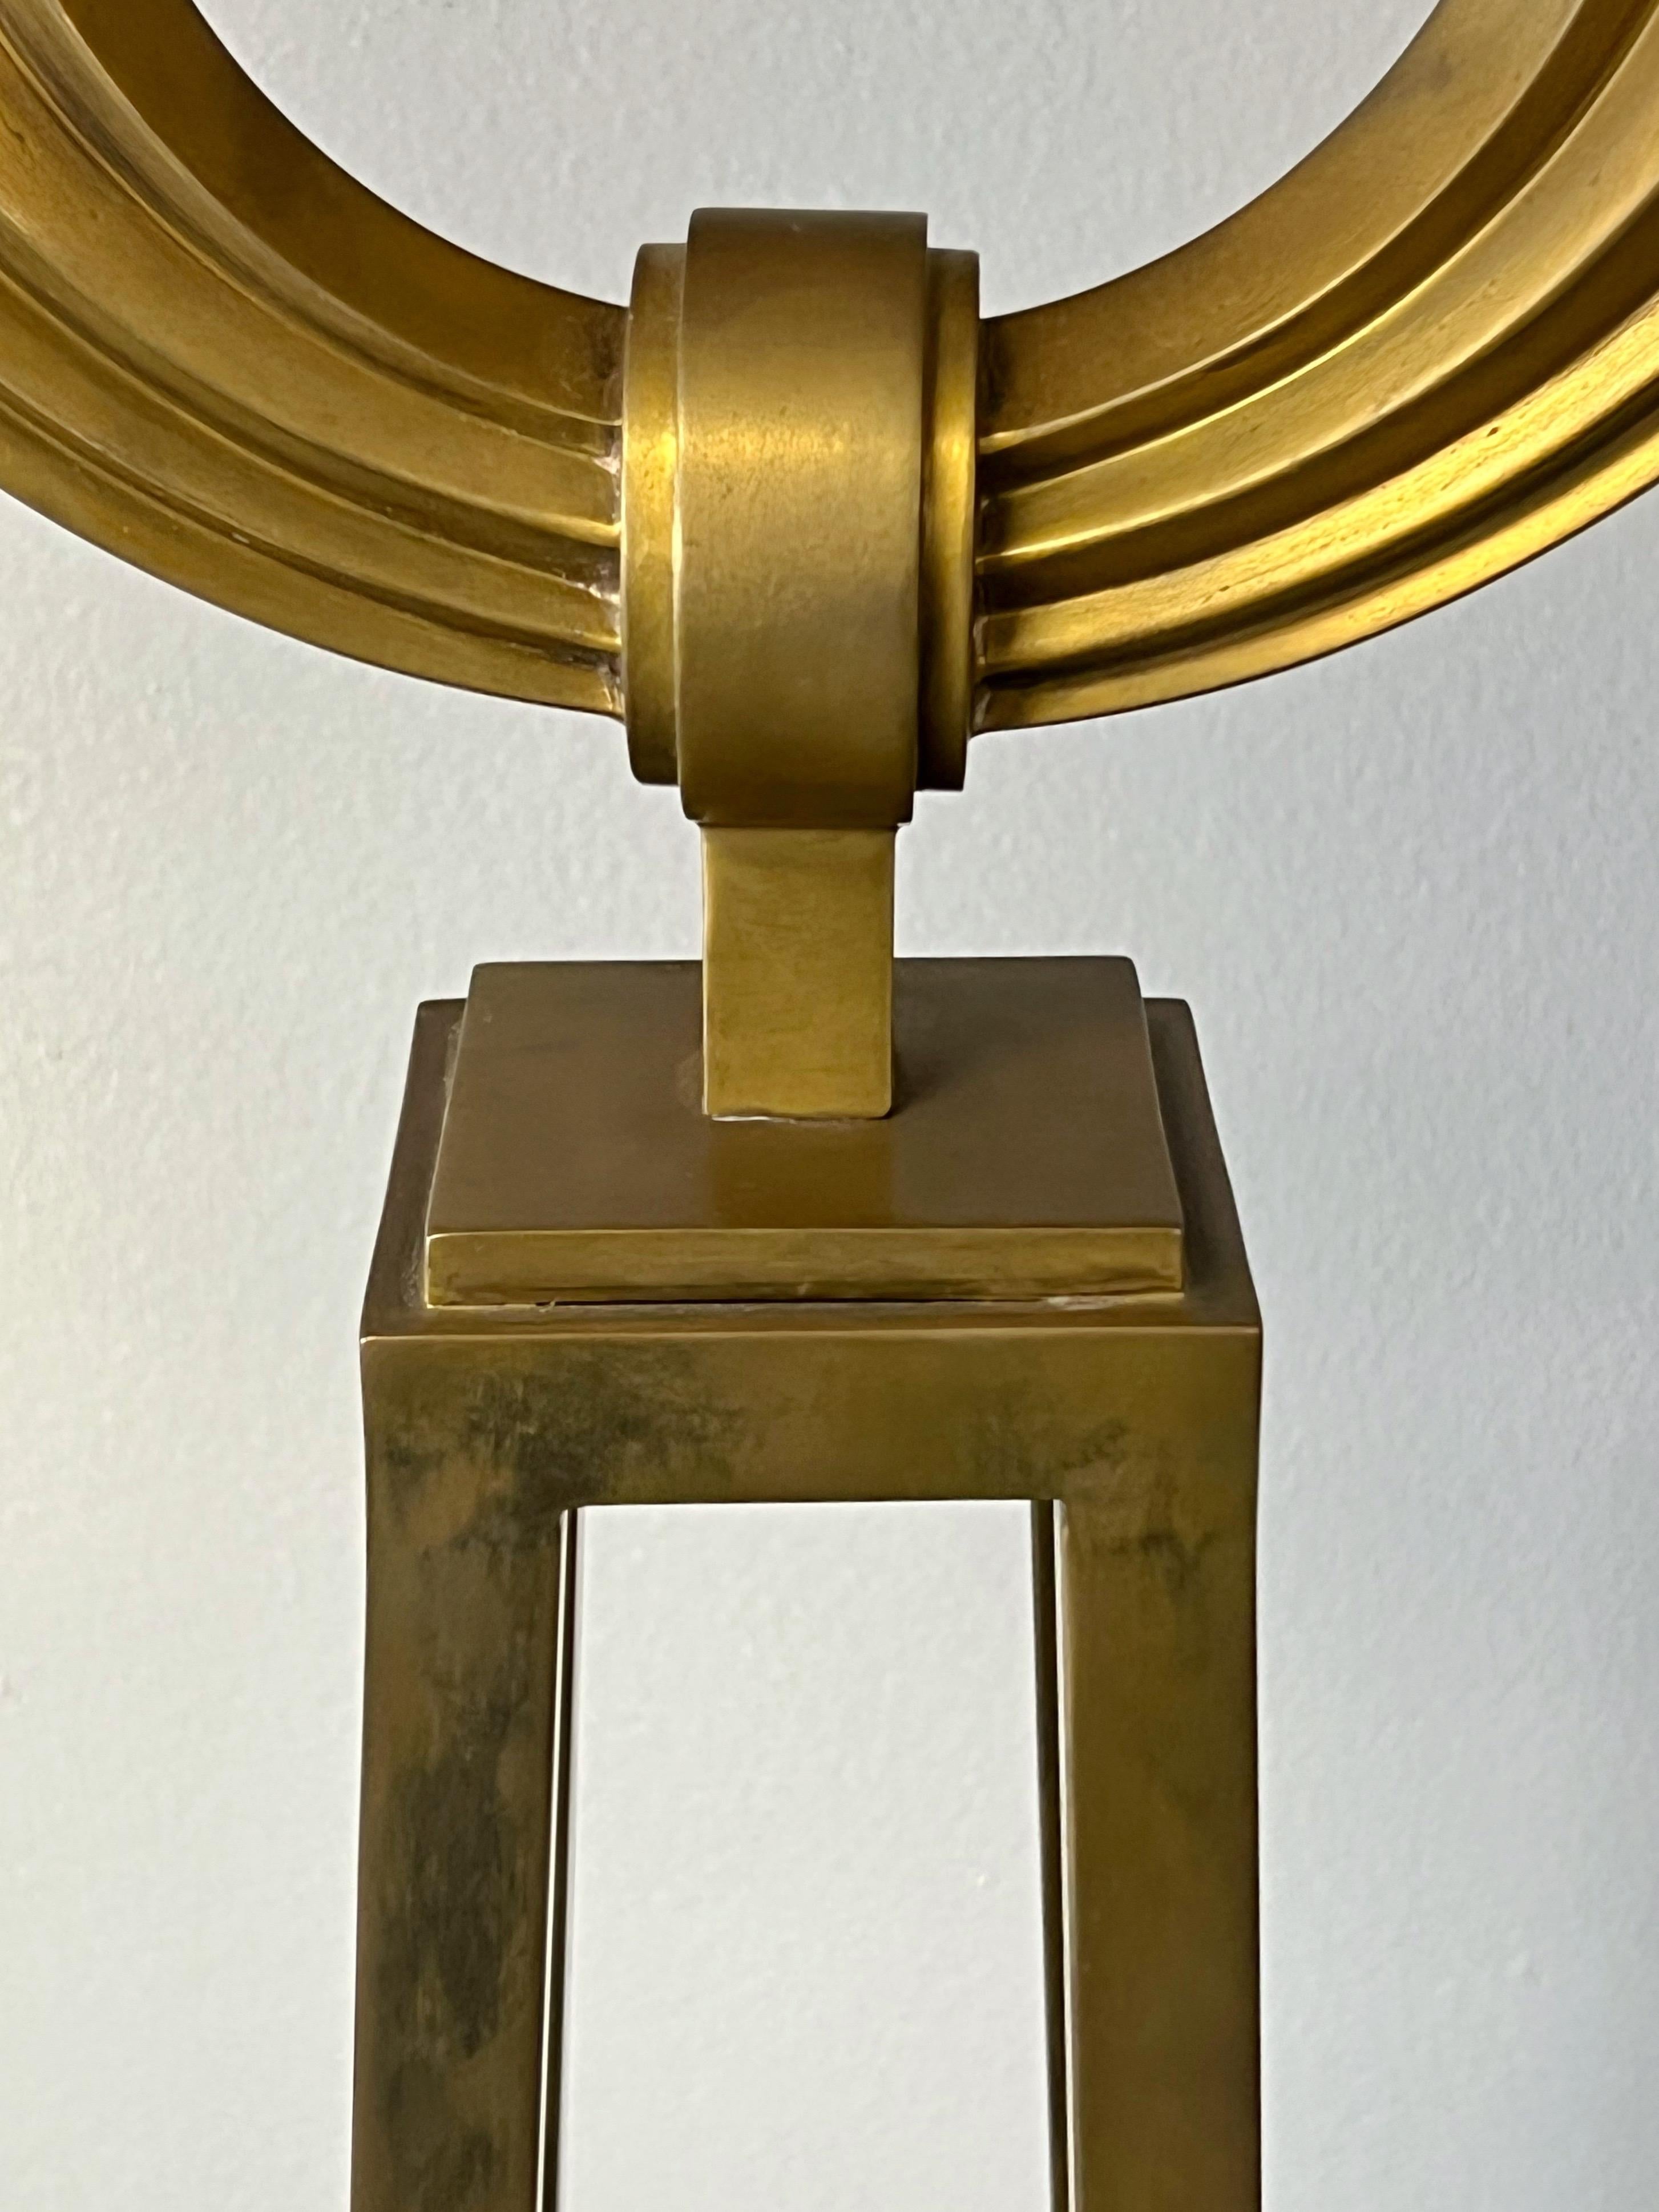 A brass floor lamp in the neoclassic style. Comes with a vintage shade with Greek key detail. Nice patina to brass. 3 way socket.